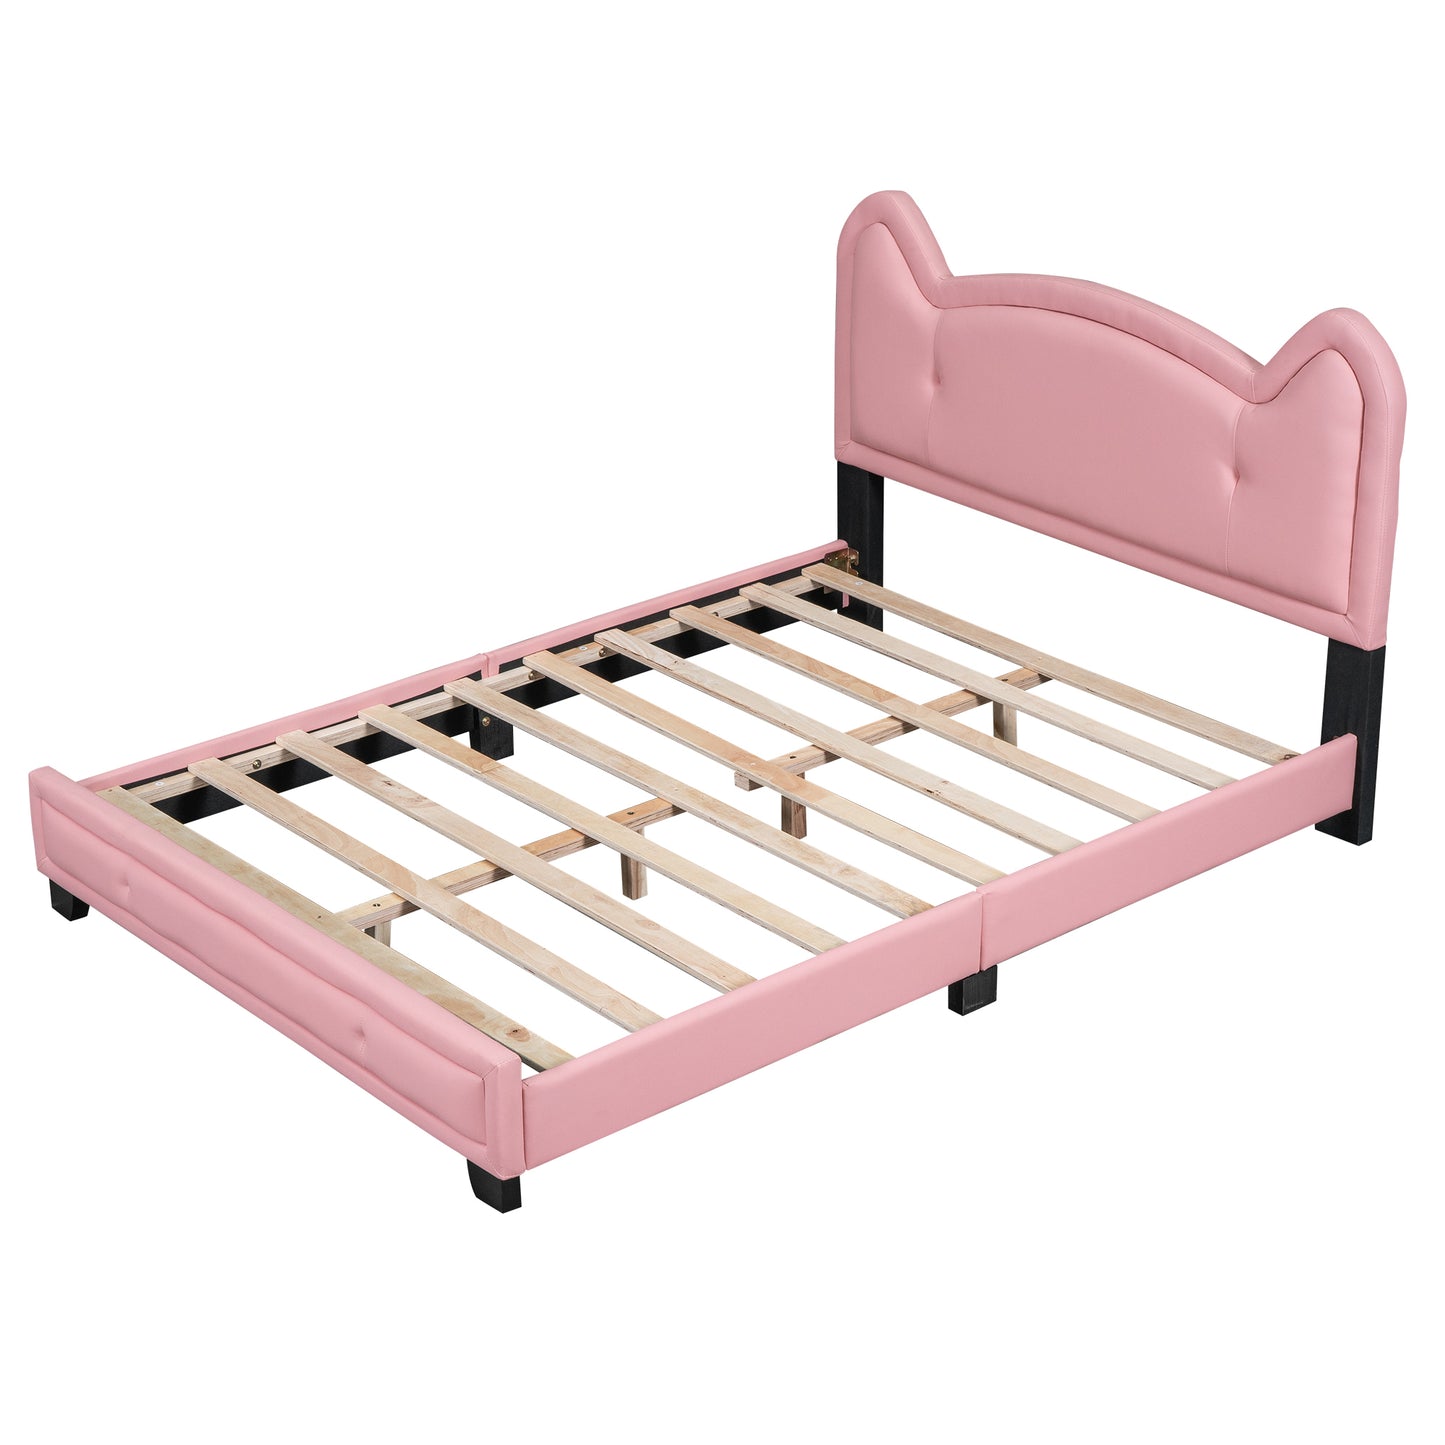 Full Size Upholstered Platform Bed with Carton Ears Shaped Headboard, Pink